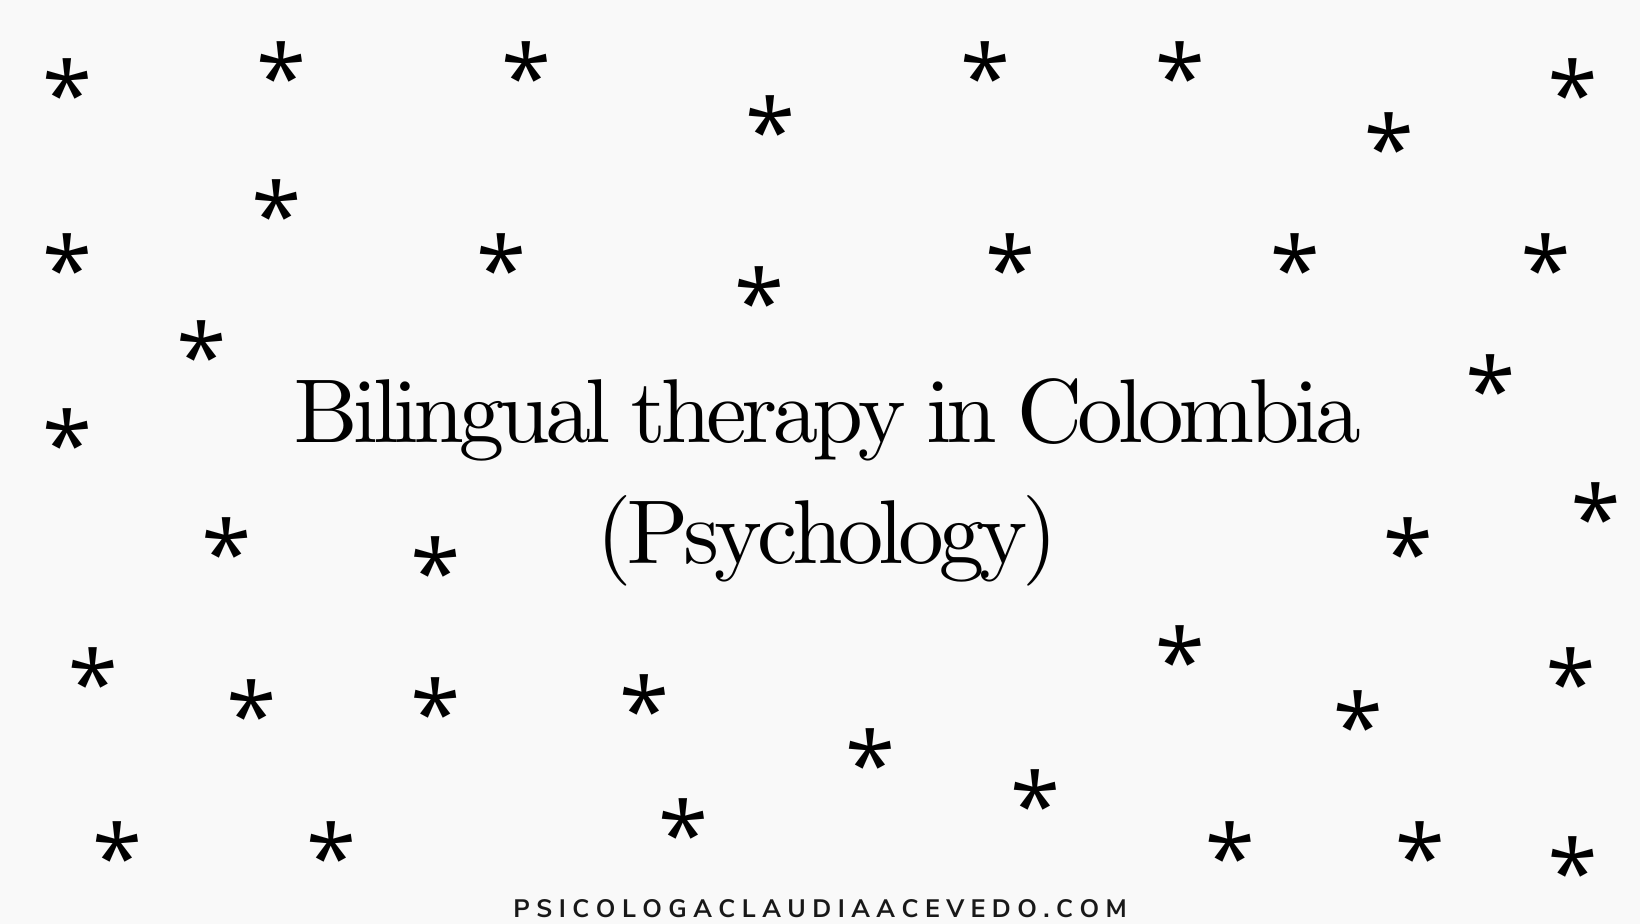 Bilingual therapy in Colombia (Psychology) 